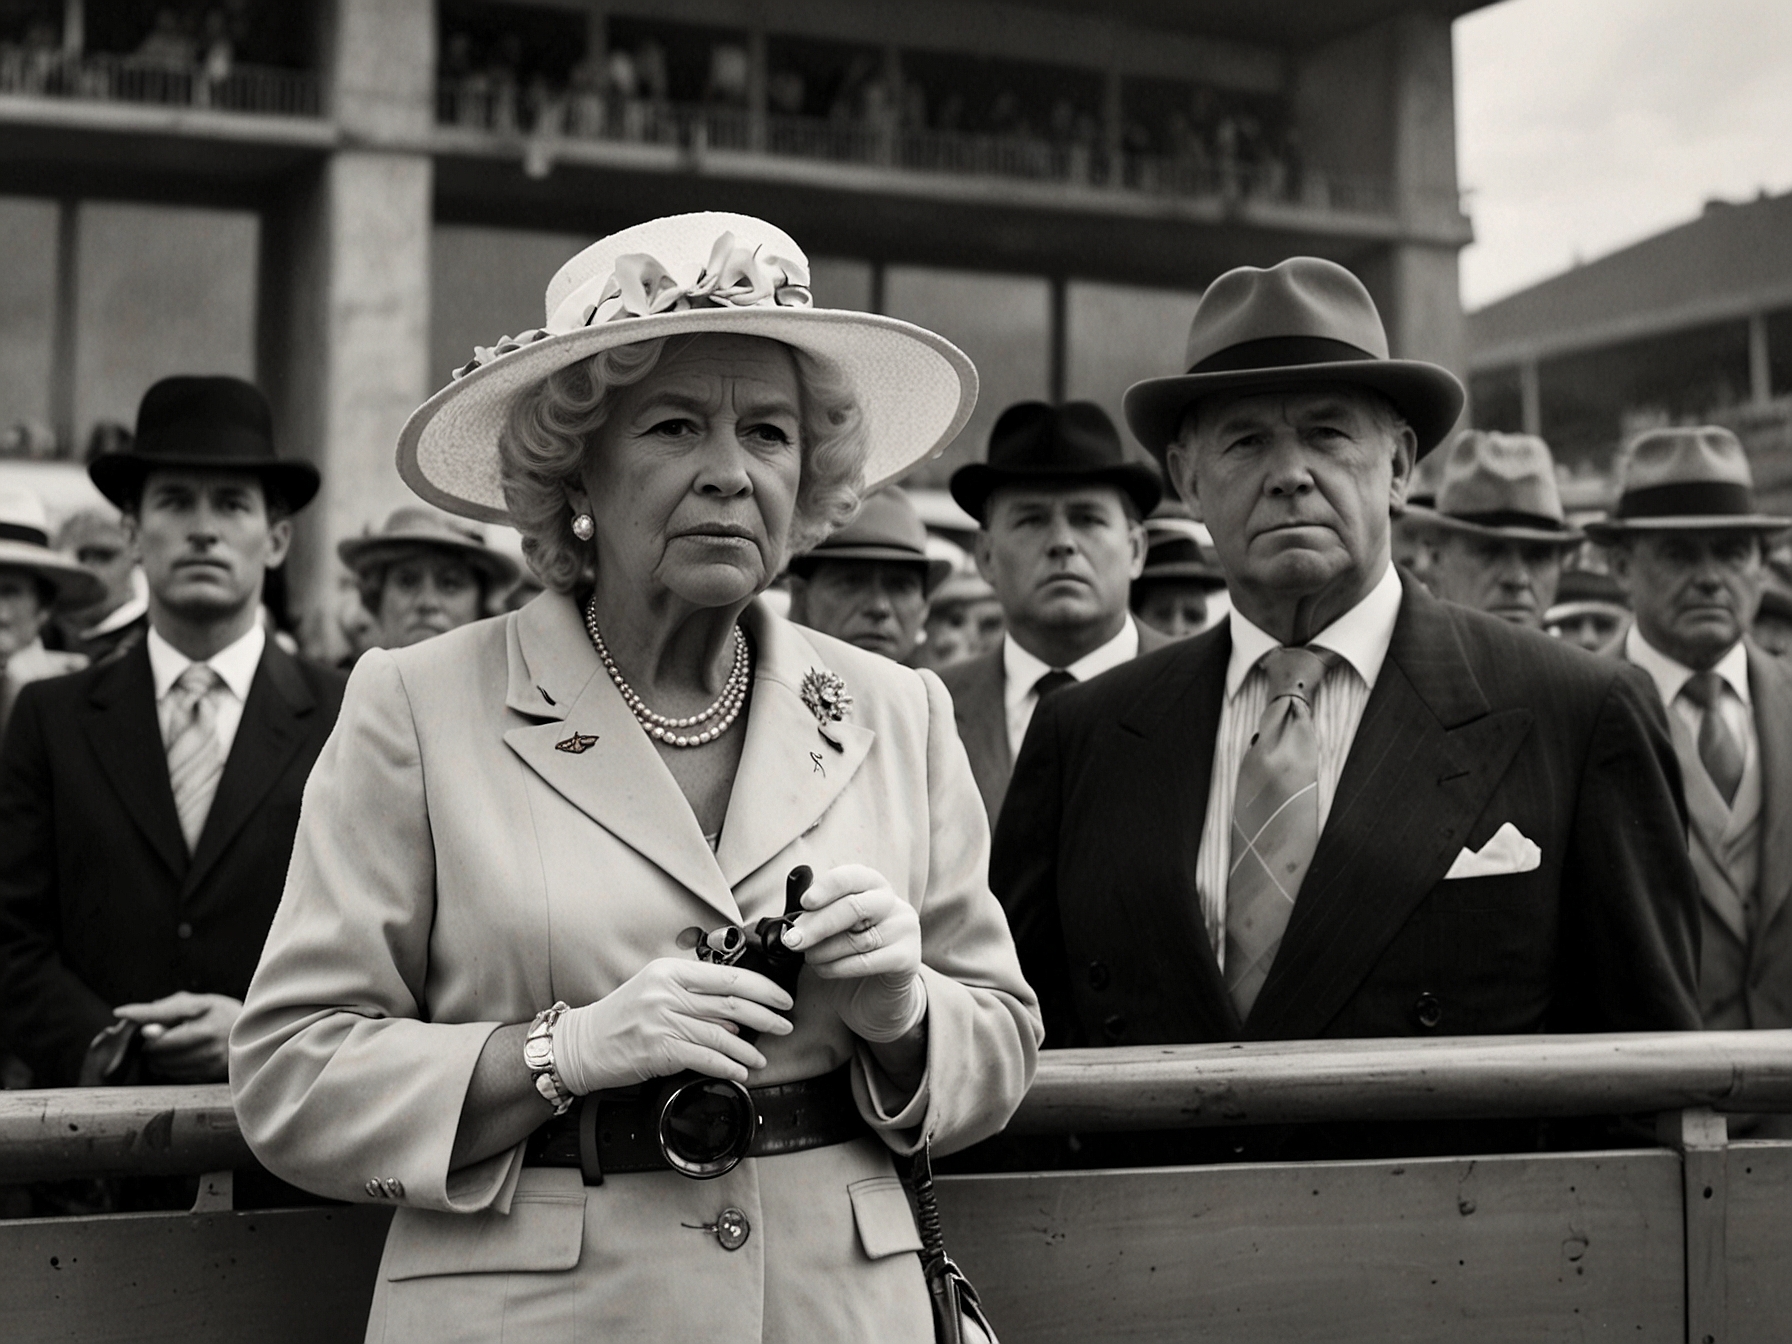 Queen Camilla, holding binoculars and looking visibly frustrated, observed the horse races intently. King Charles stands by her side, maintaining a composed demeanor despite the day's unpredictable outcomes.